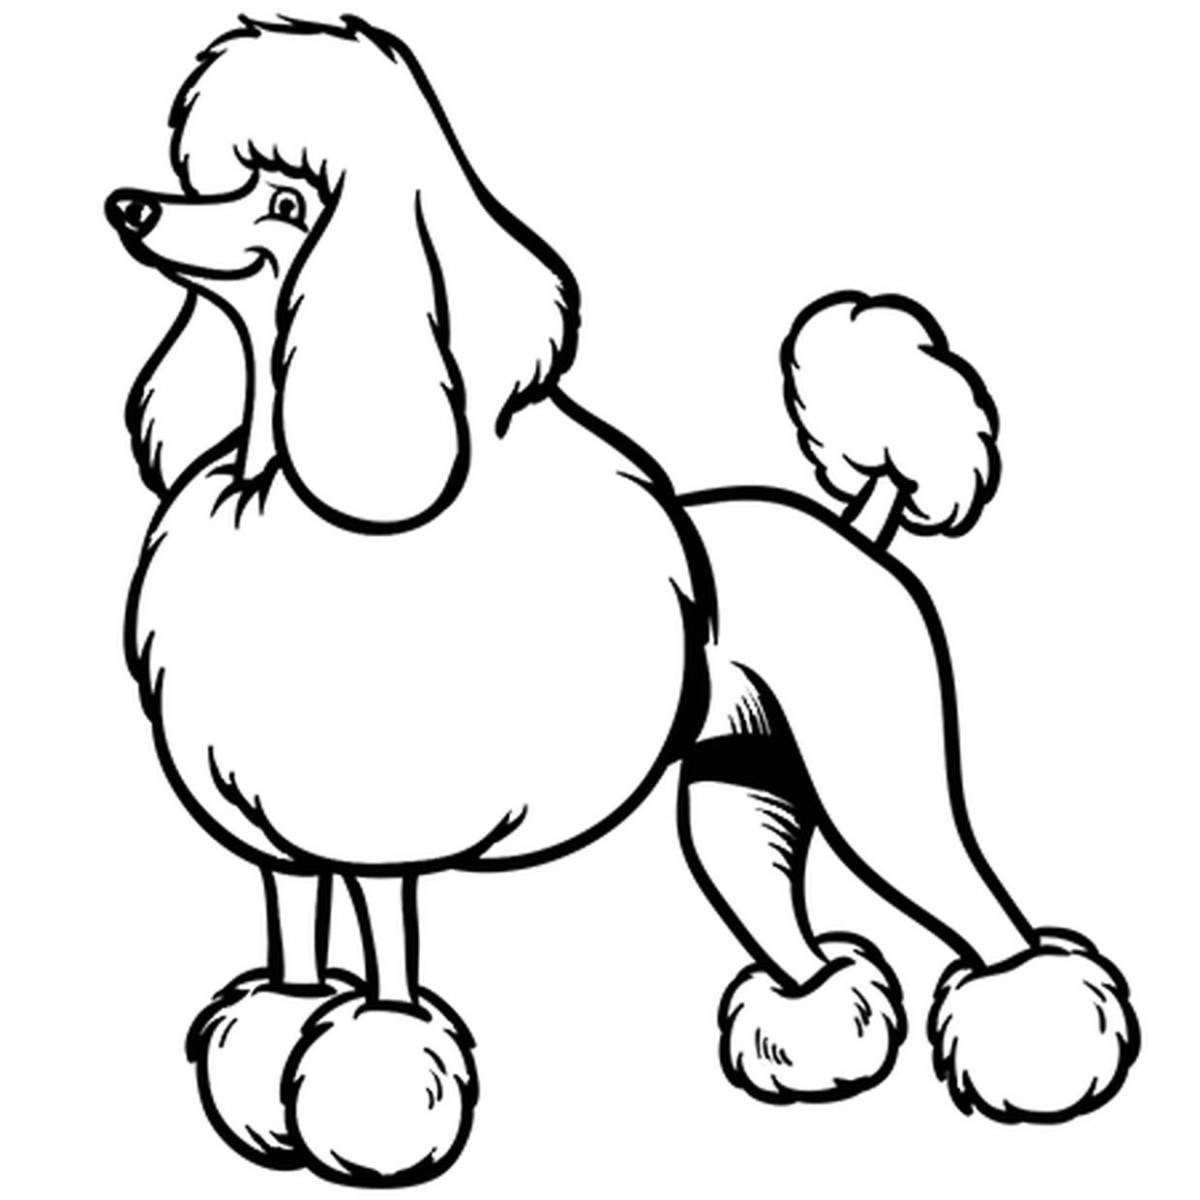 Exquisite poodle coloring book for kids